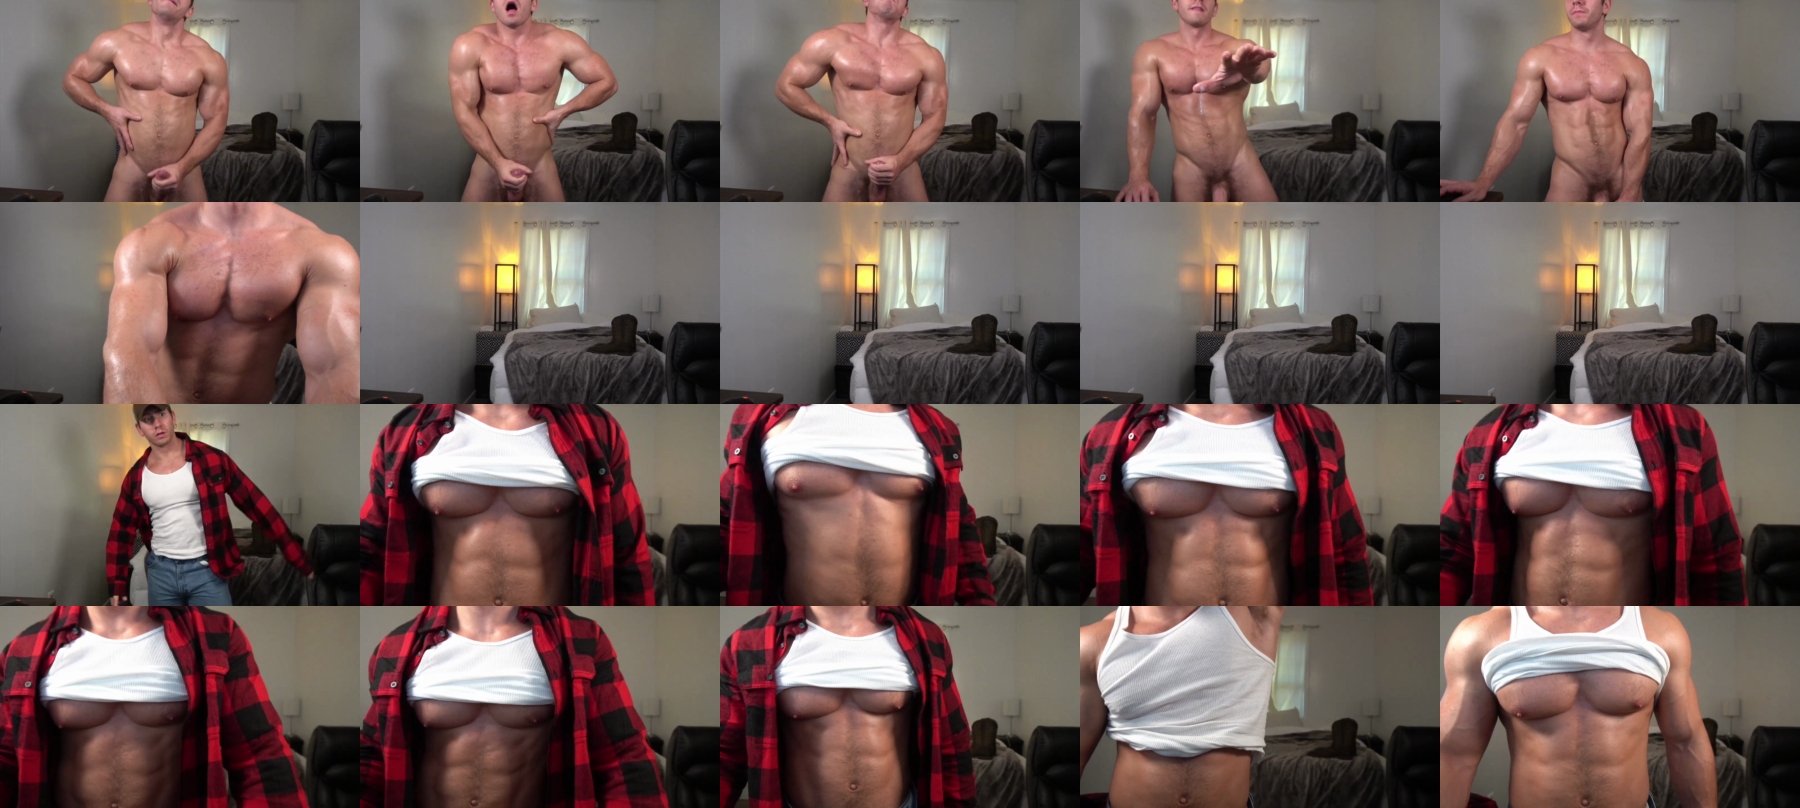 Hotmuscles6t9  01-09-2021 Male Topless